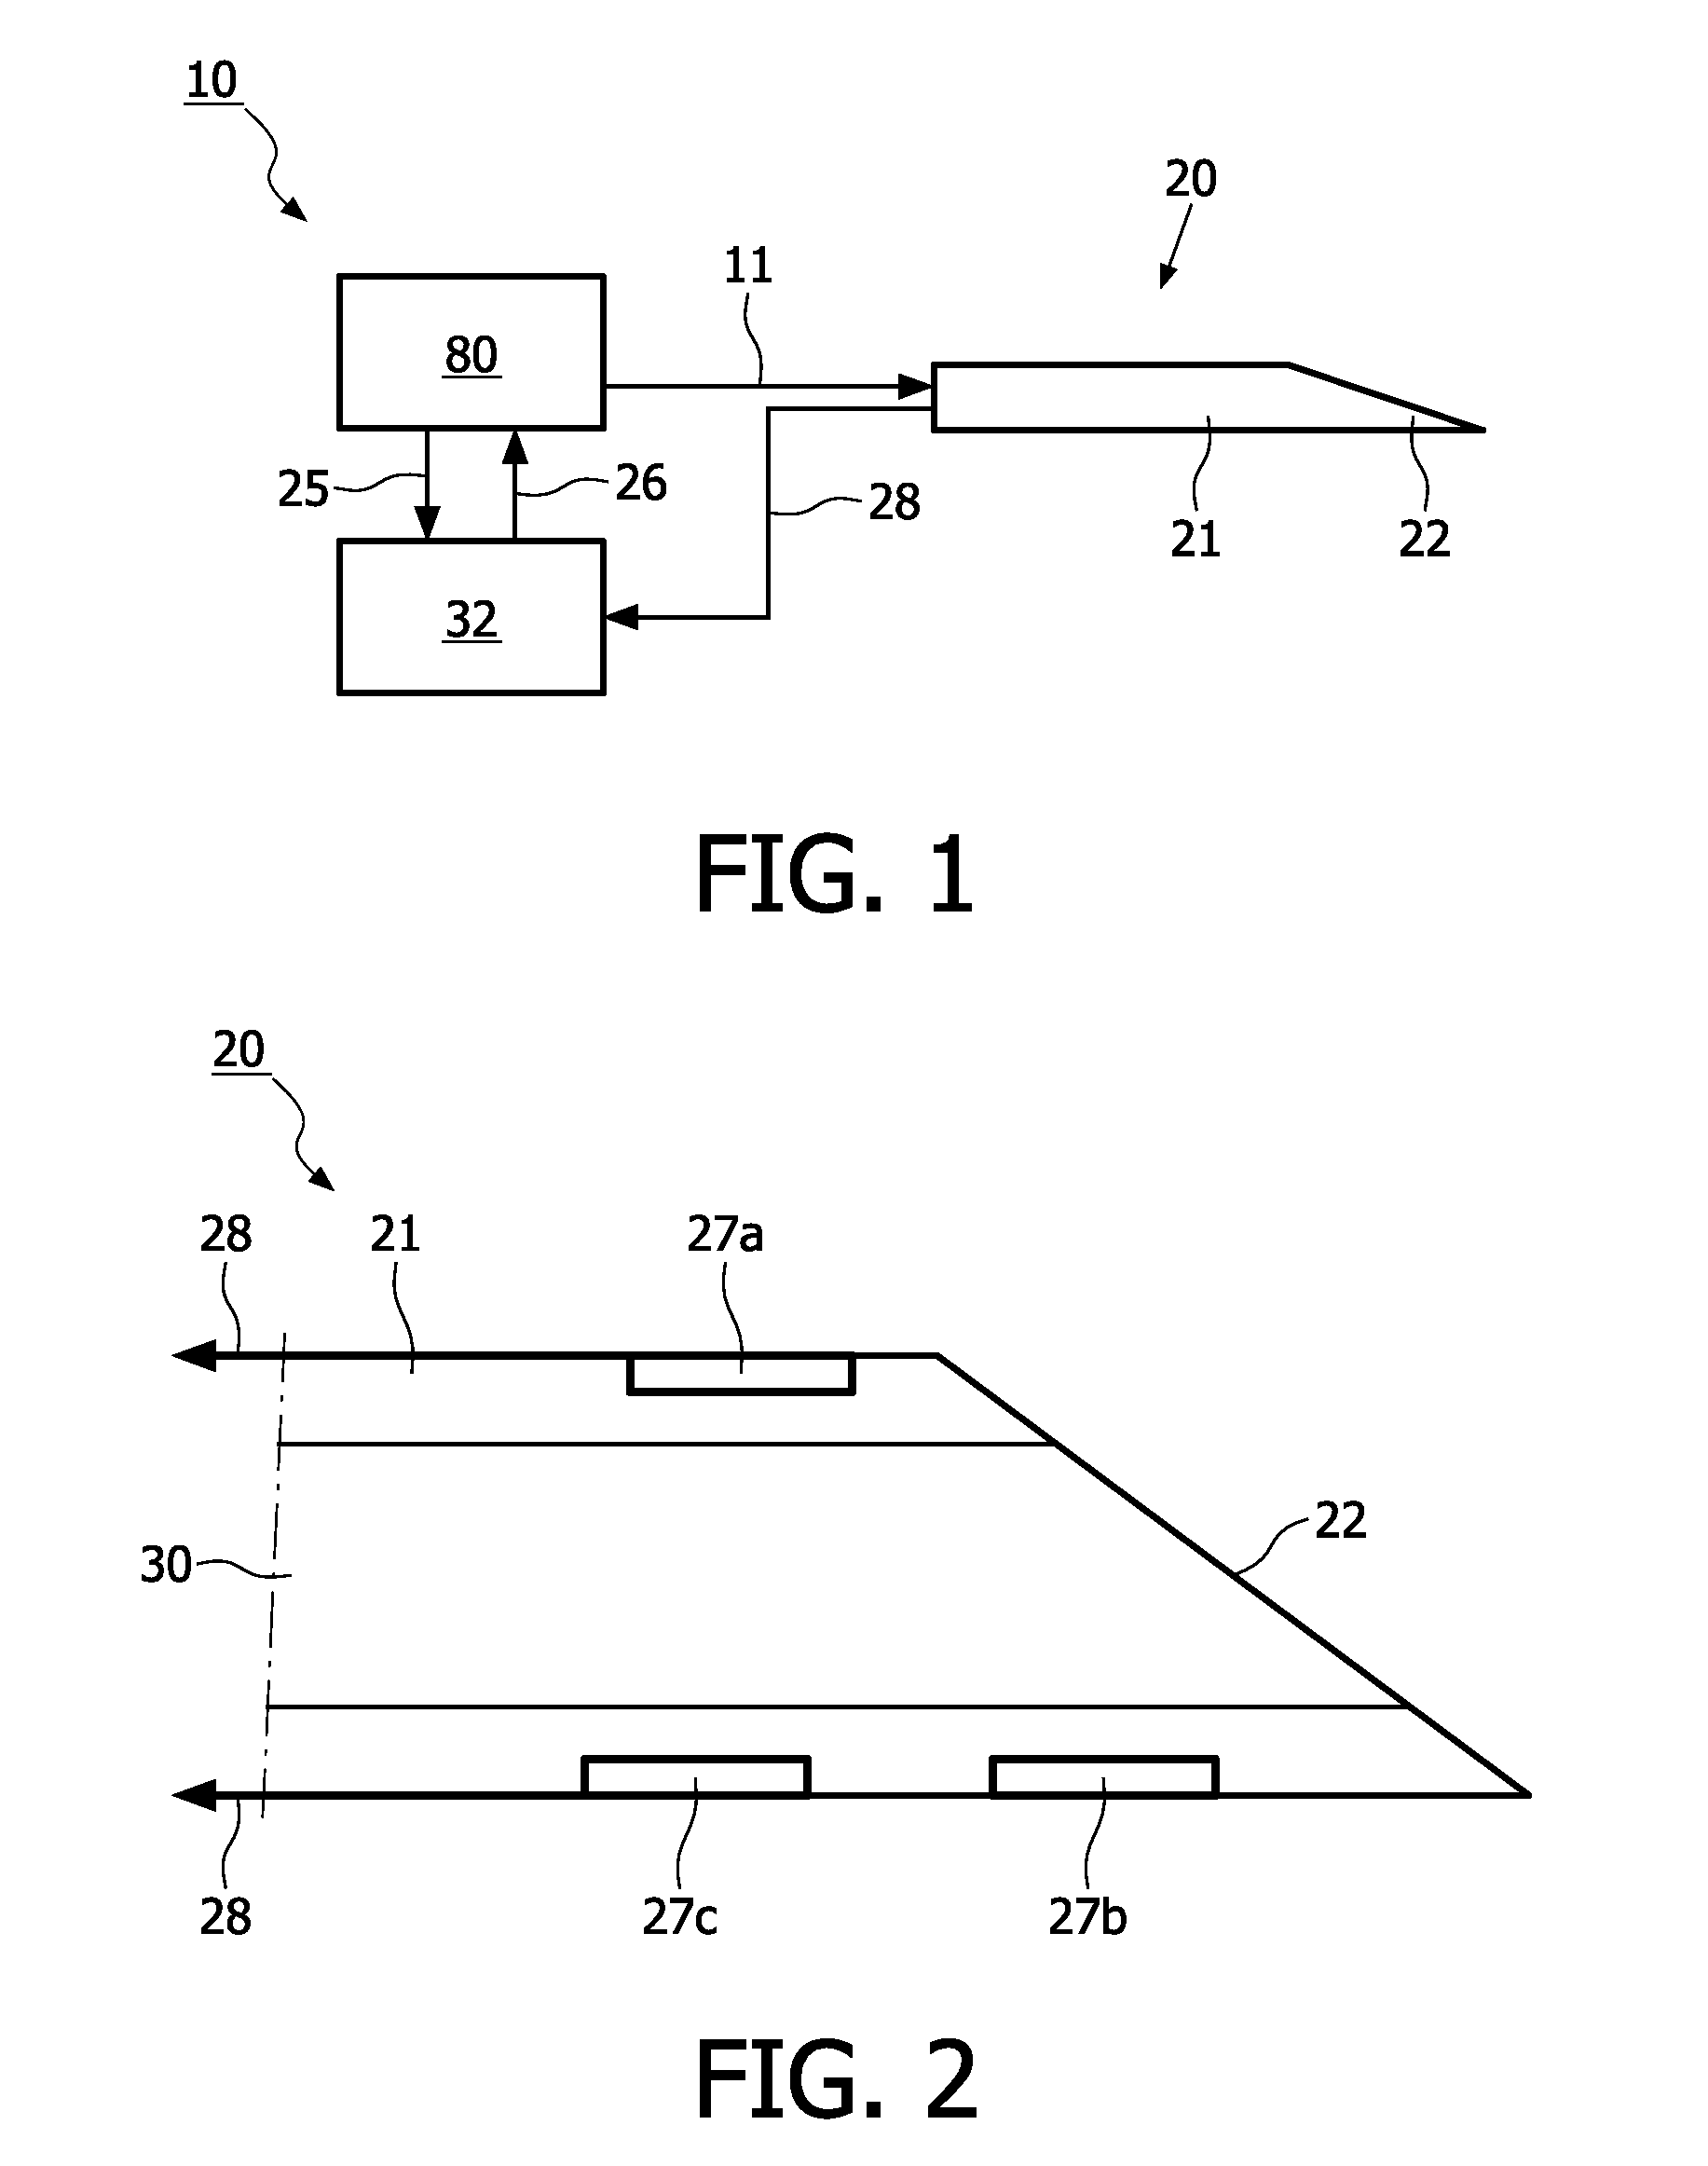 Optical examination device adapted to be at least partially inserted into a turbid medium